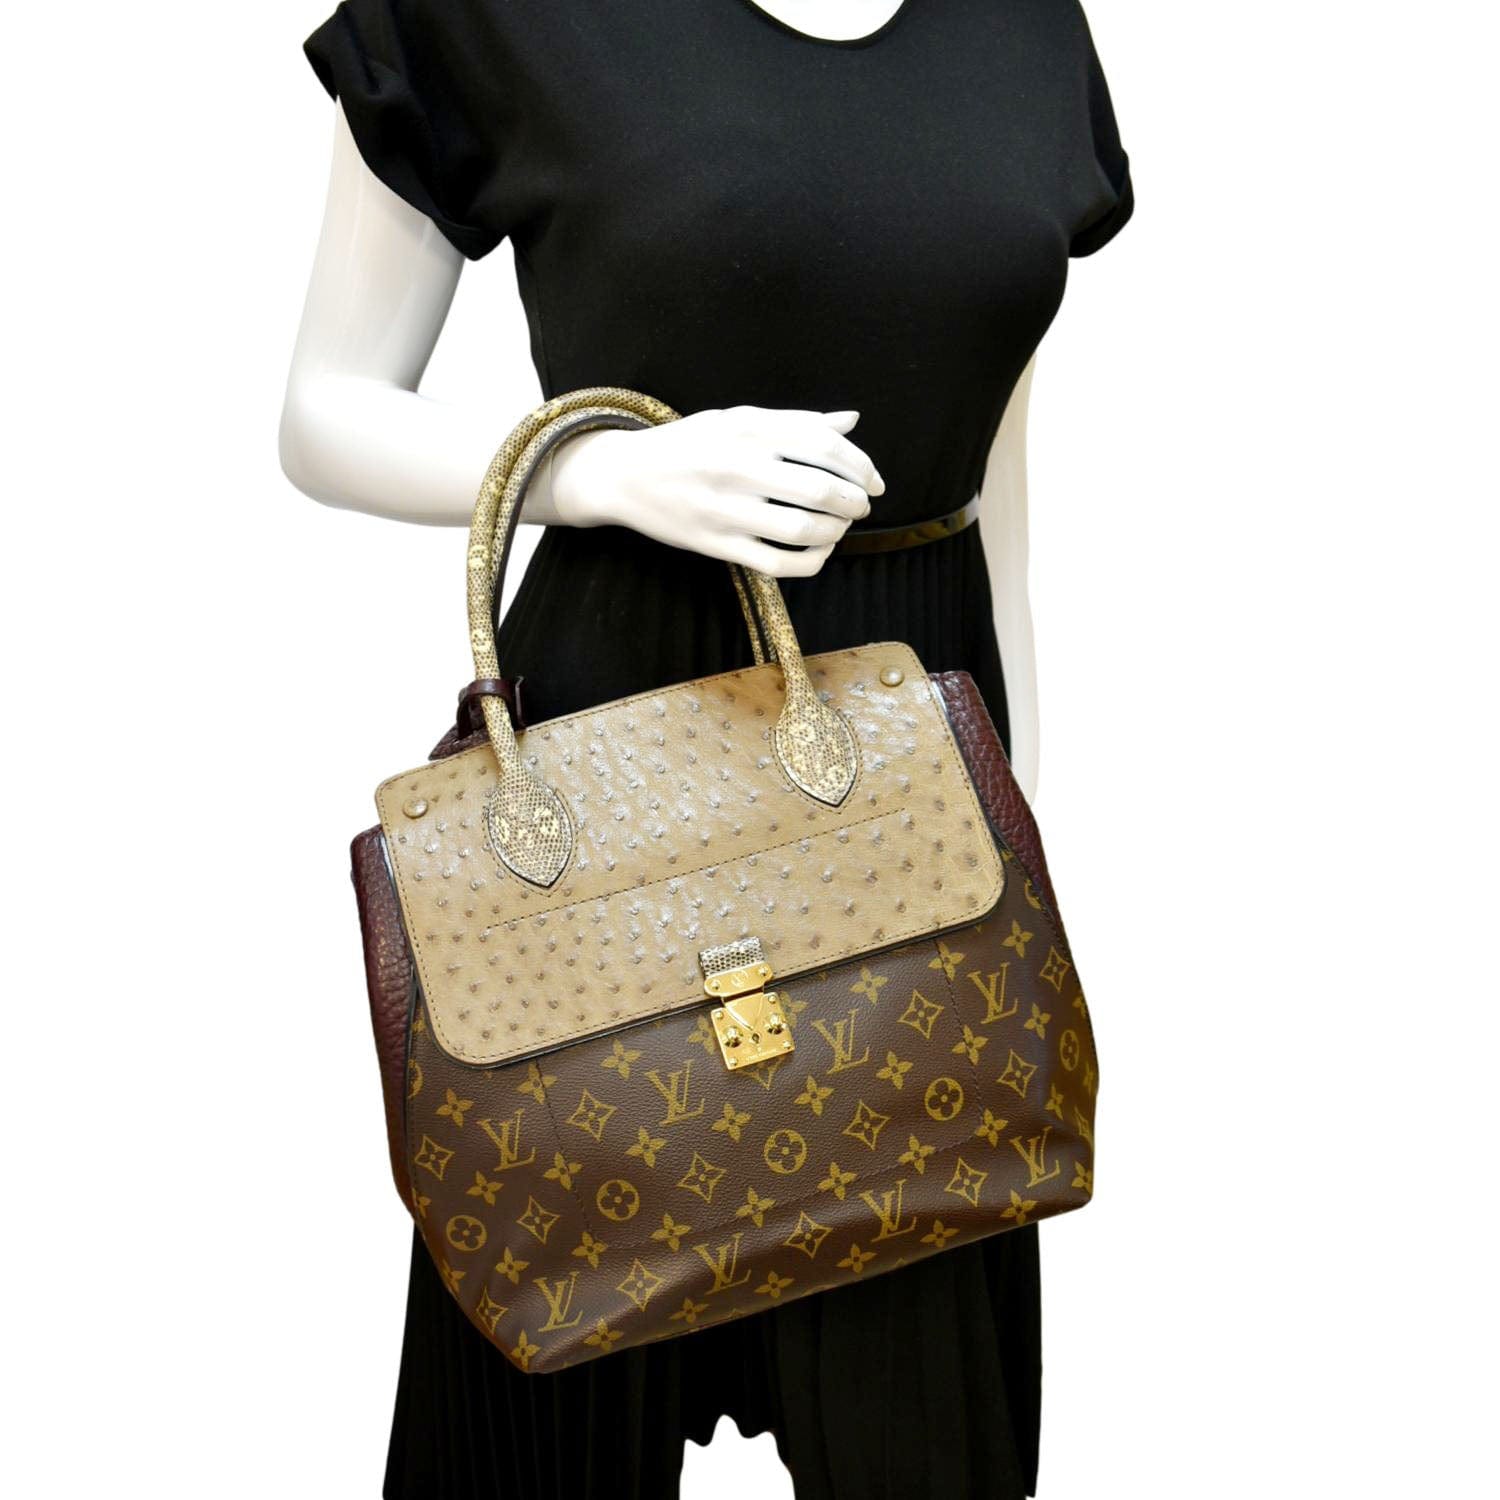 vuitton exotic leather bags